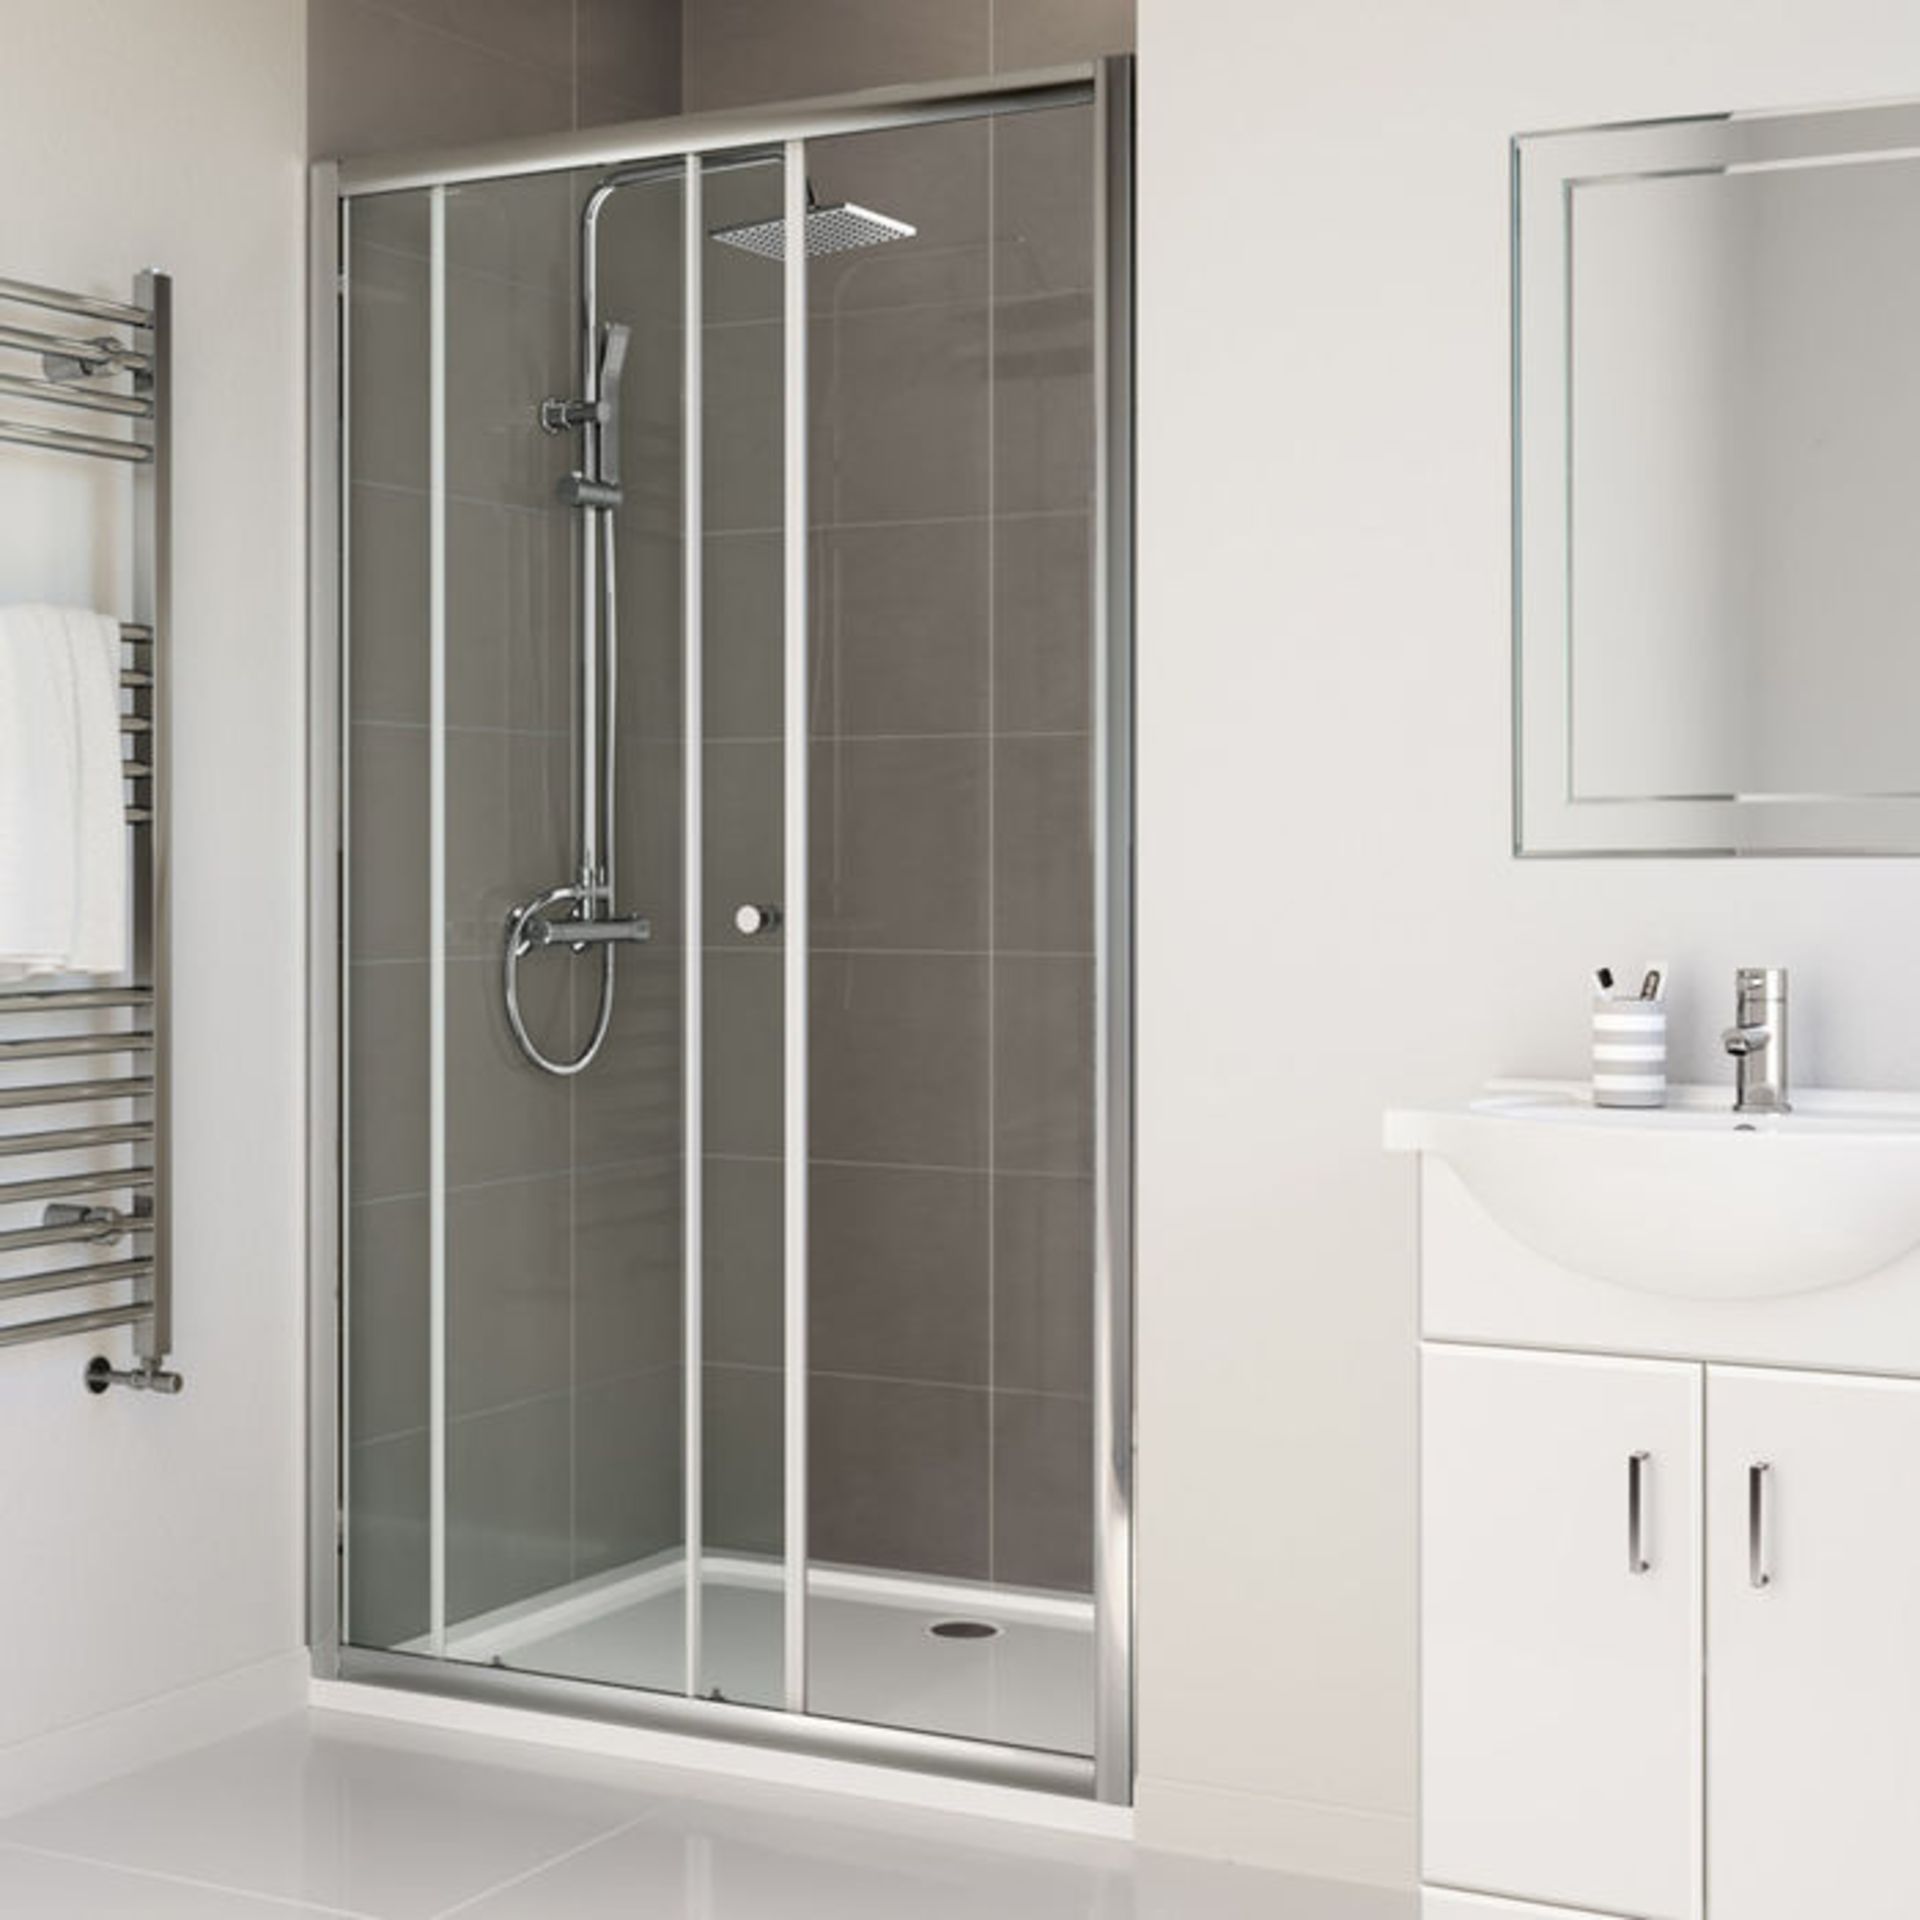 (W98) 1200mm - Elements Sliding Shower Door. RRP £299.99. 4mm Safety Glass Fully waterproof tested - Image 2 of 3